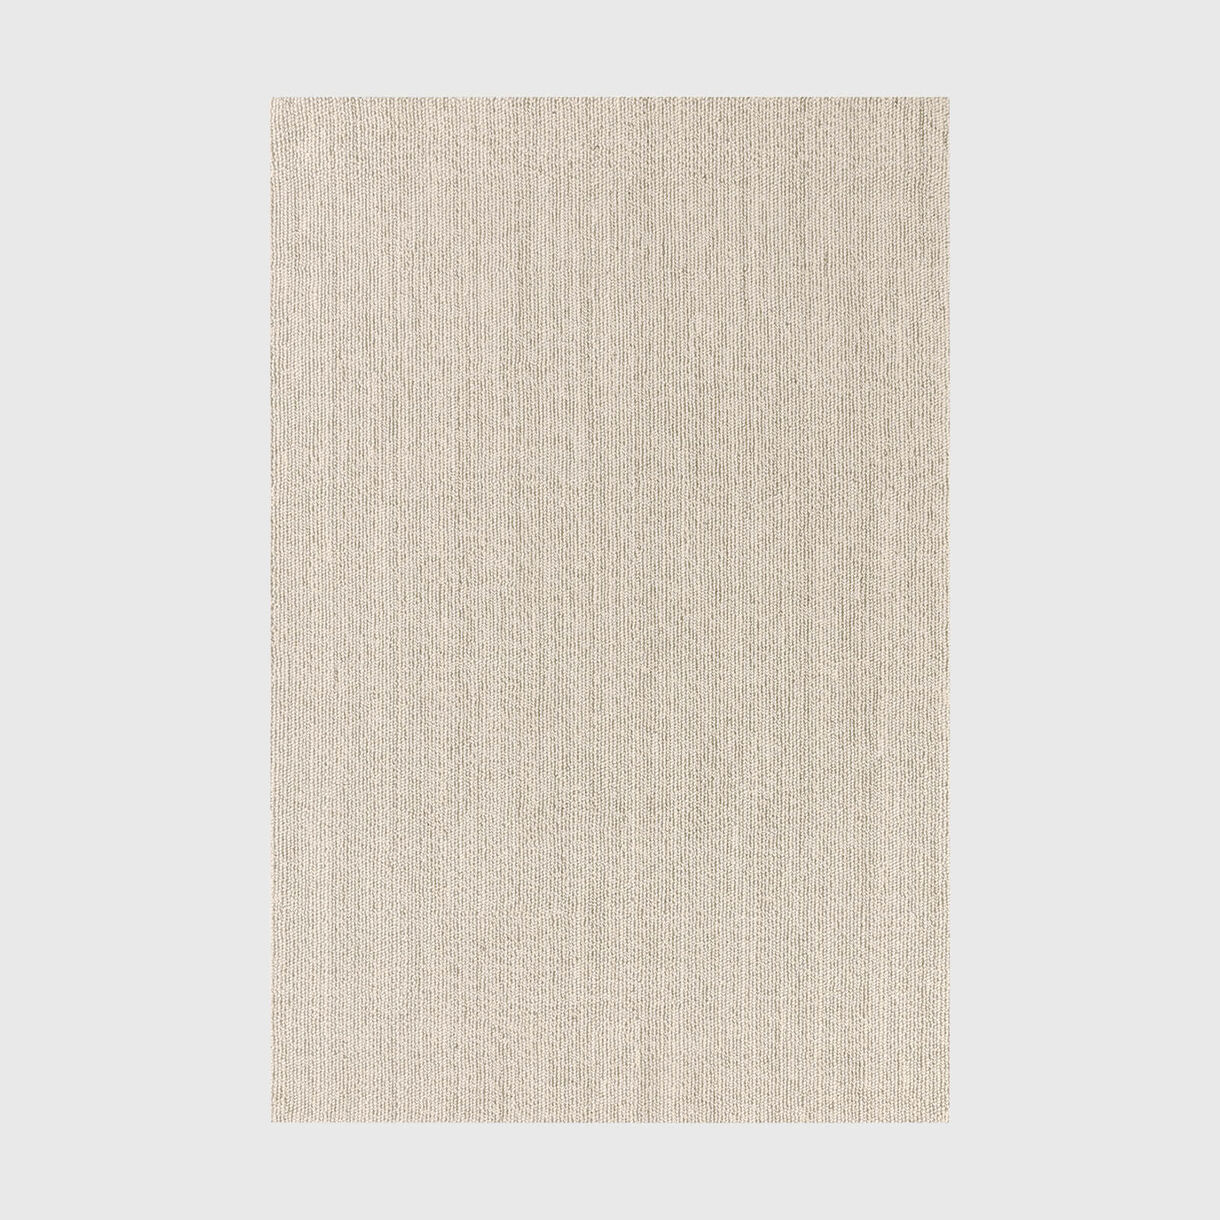 Minerals Rug, Taupe Gray